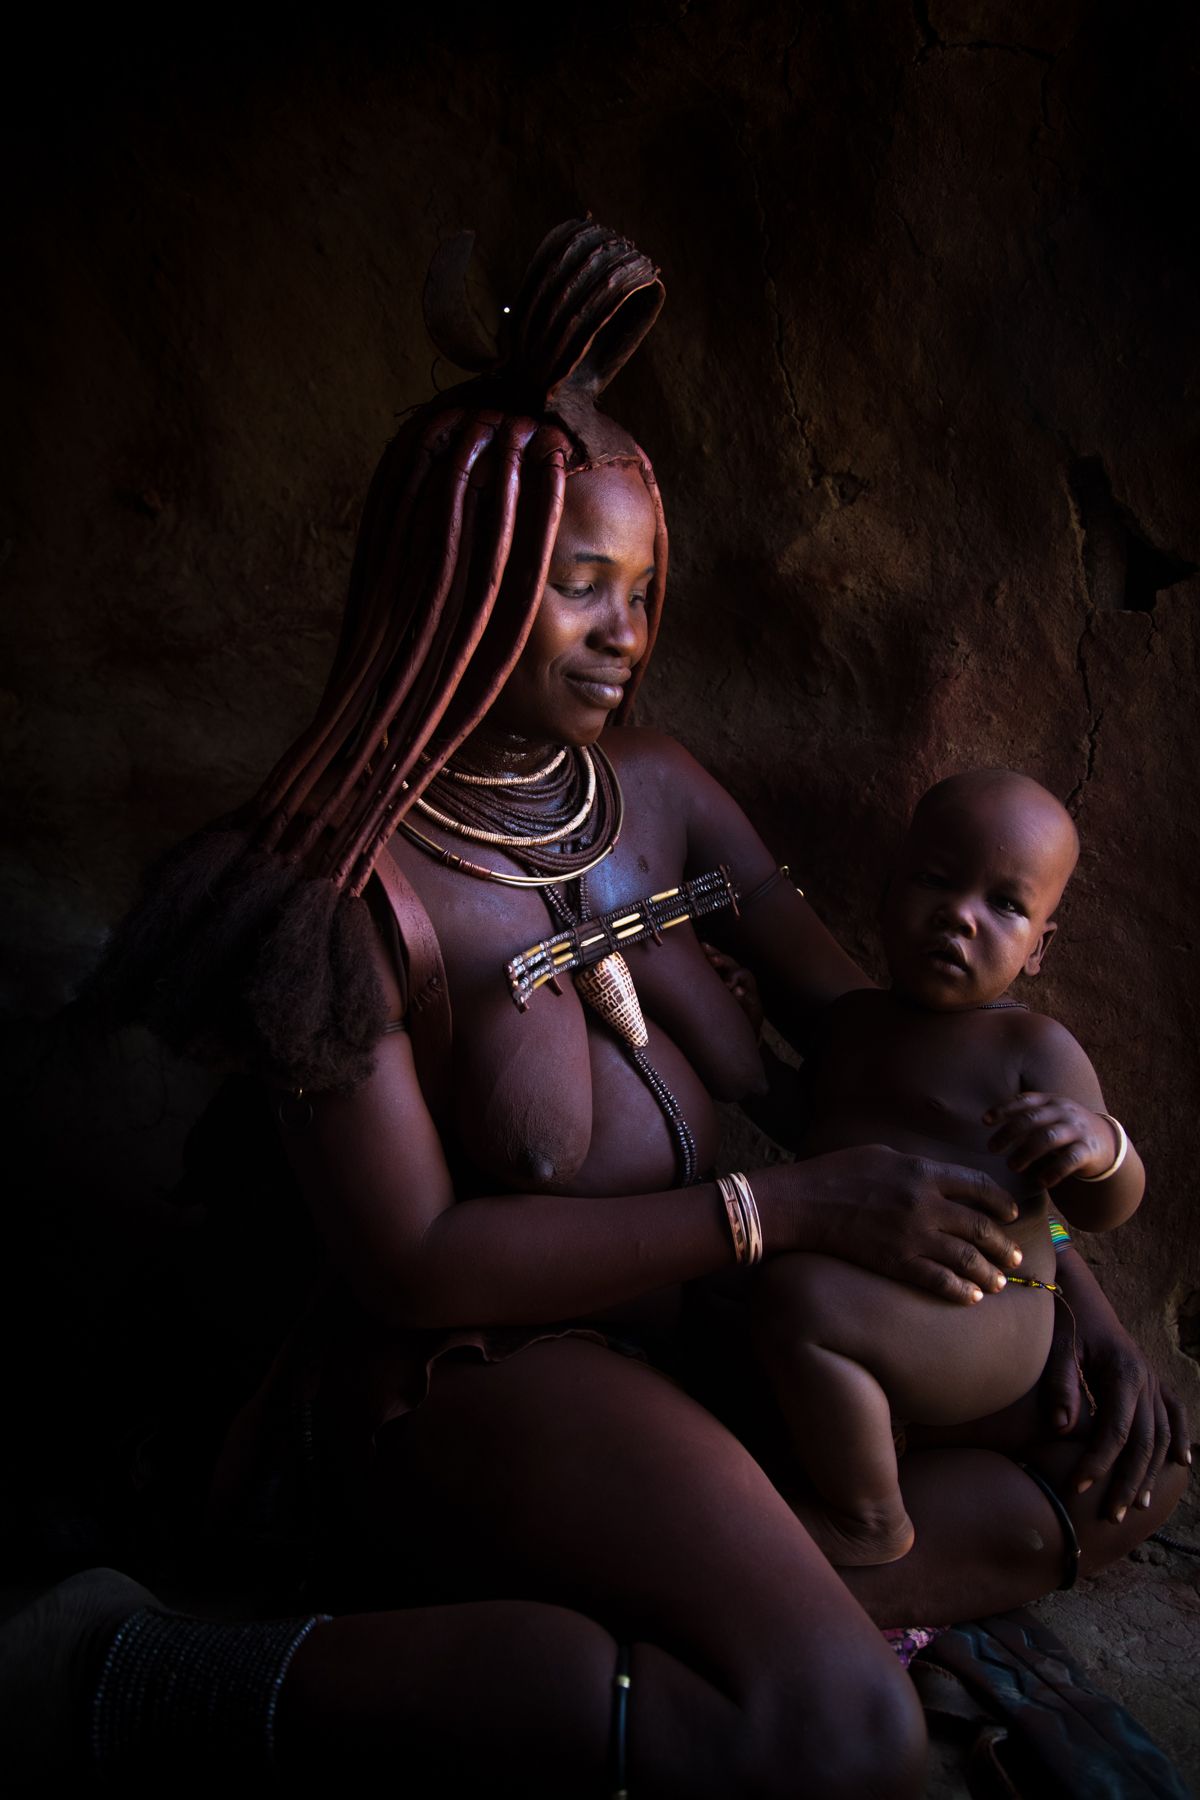 Himba woman nursing her baby on our Namibia photography tour